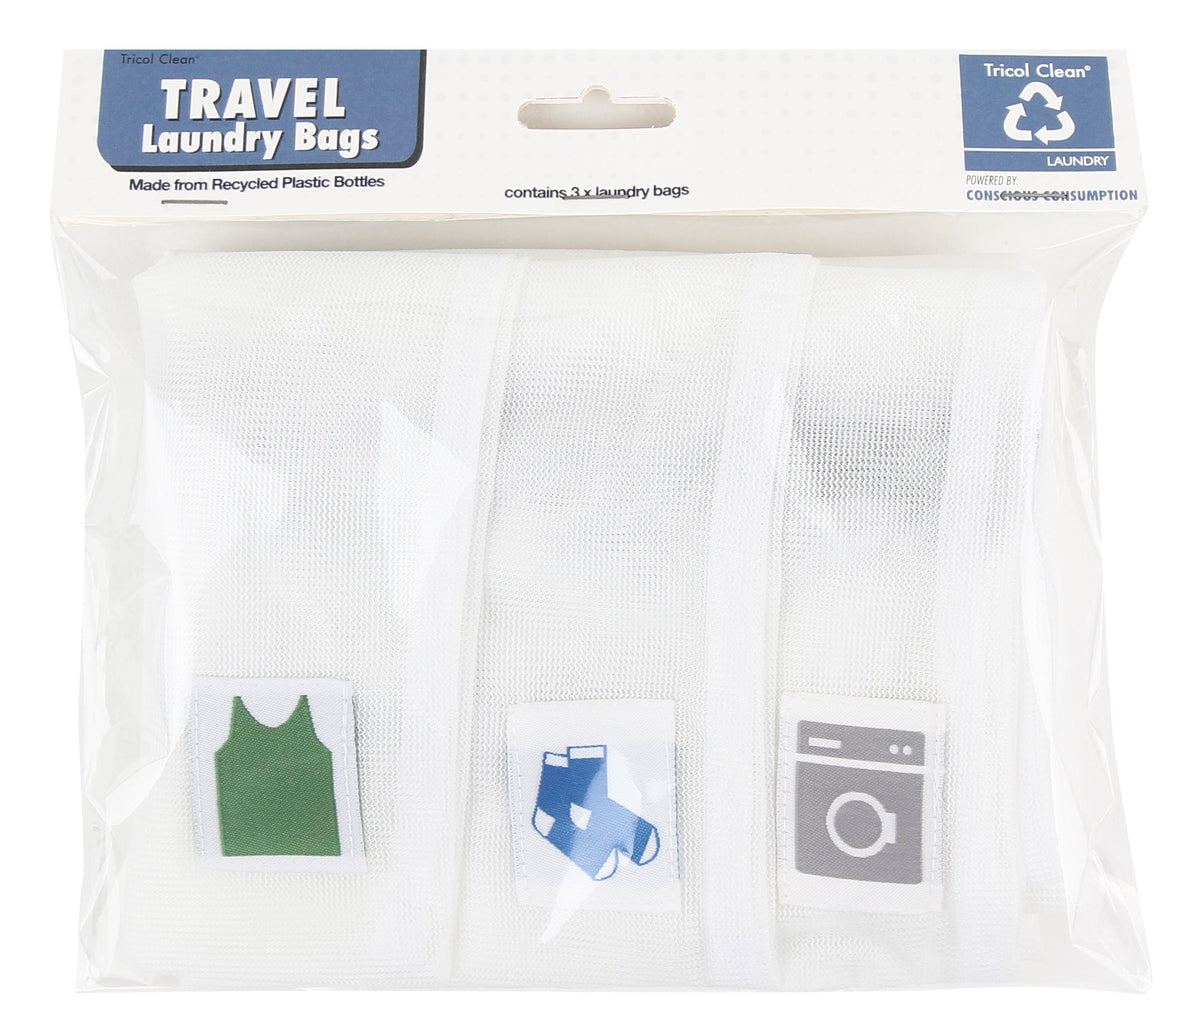 Garment Wash Bags for Laundry and Travel by The Everplush Company